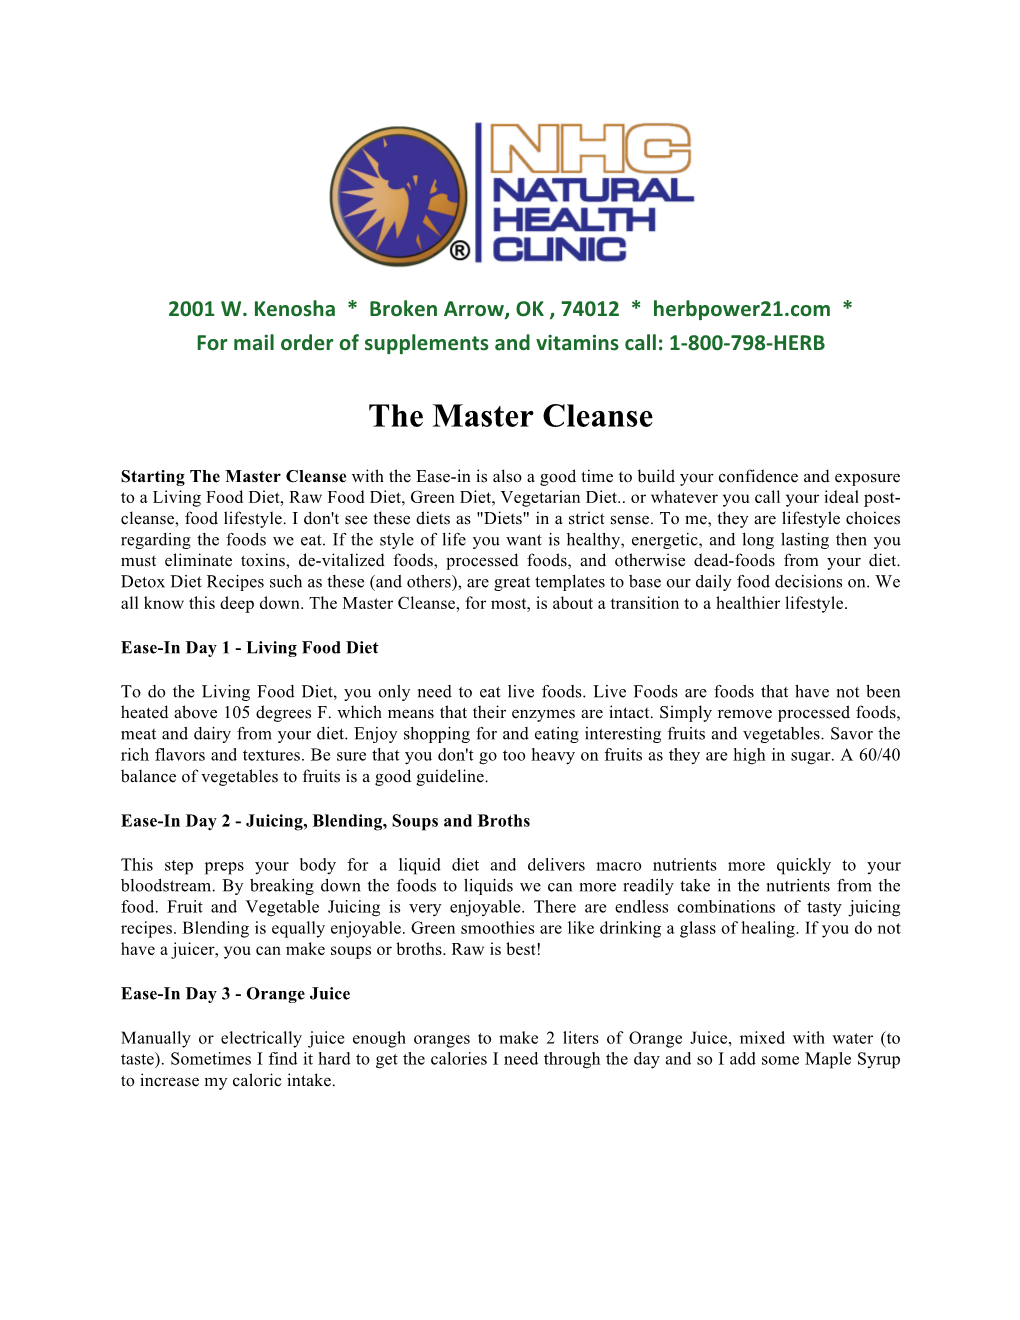 The Master Cleanse